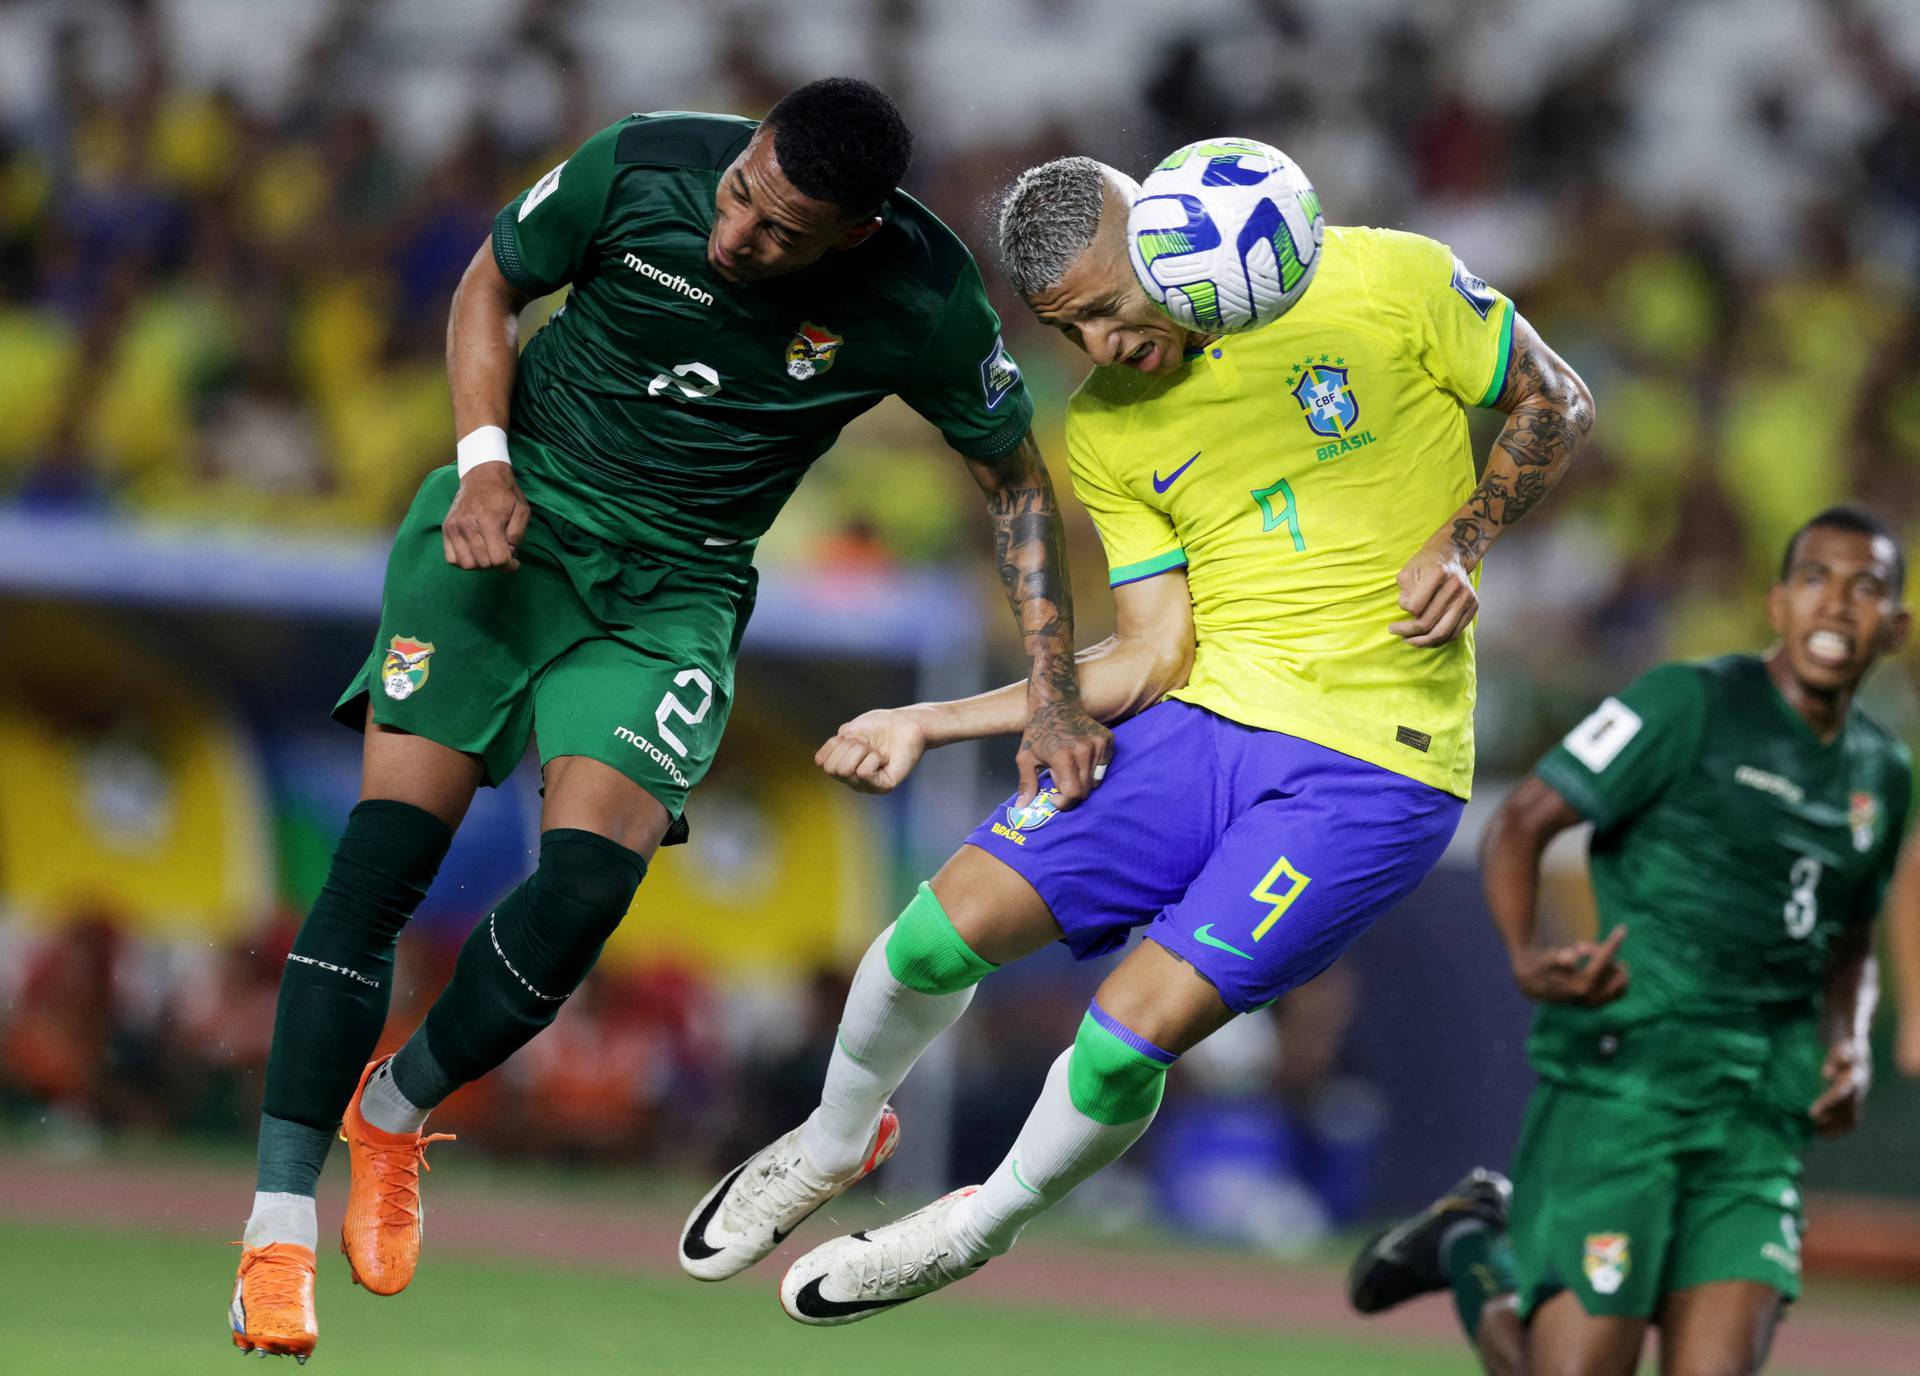 World Cup - South American Qualifiers - Brazil v Bolivia